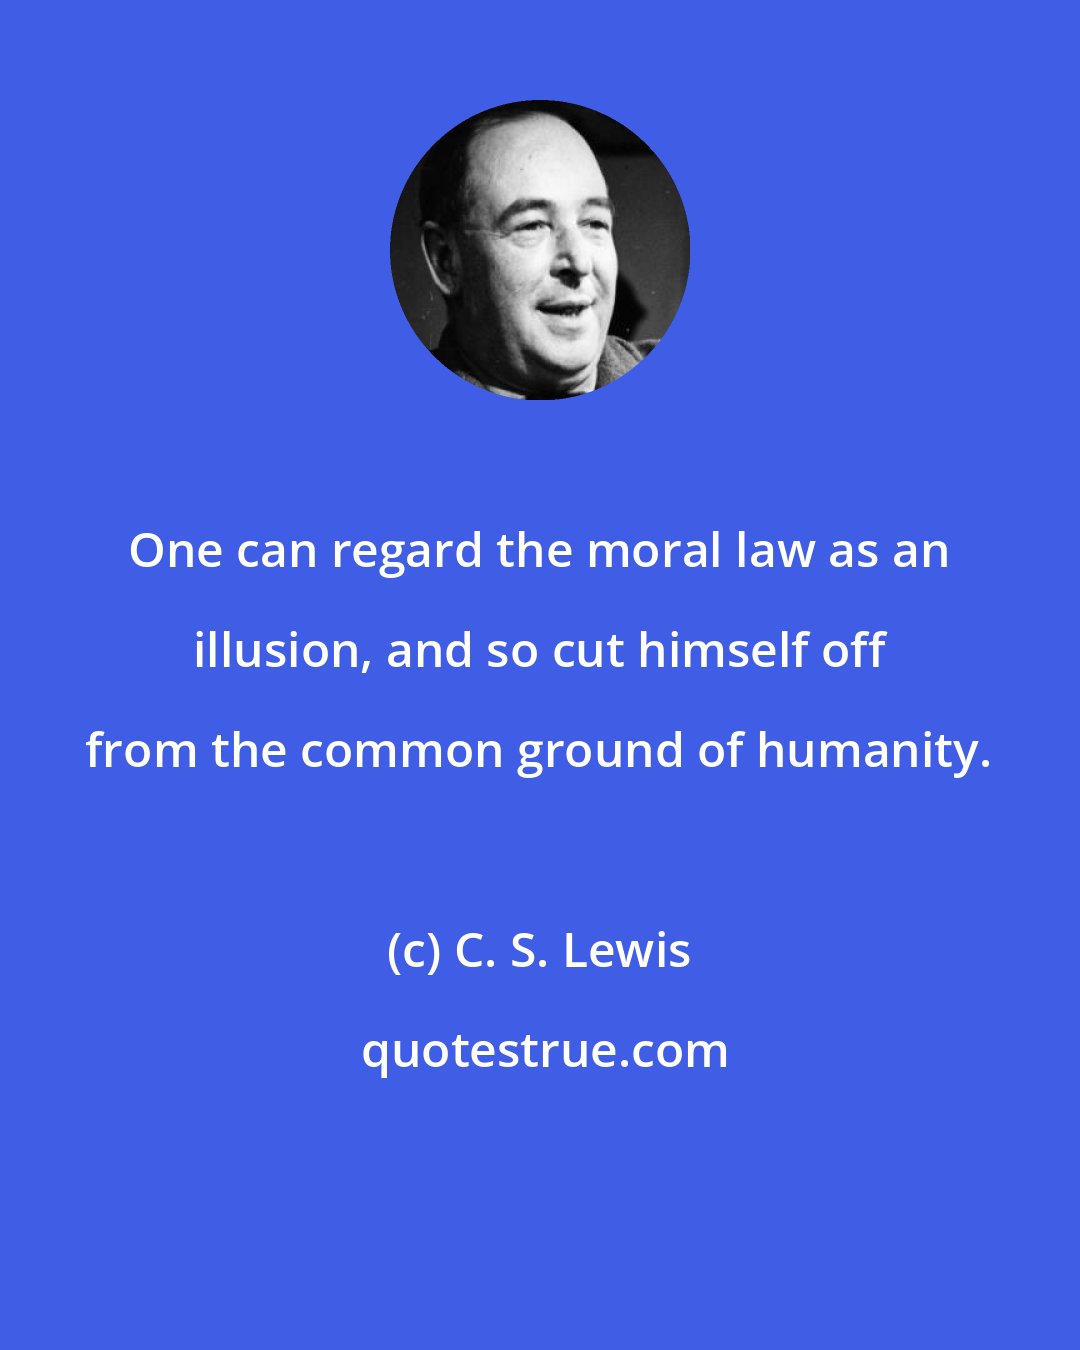 C. S. Lewis: One can regard the moral law as an illusion, and so cut himself off from the common ground of humanity.